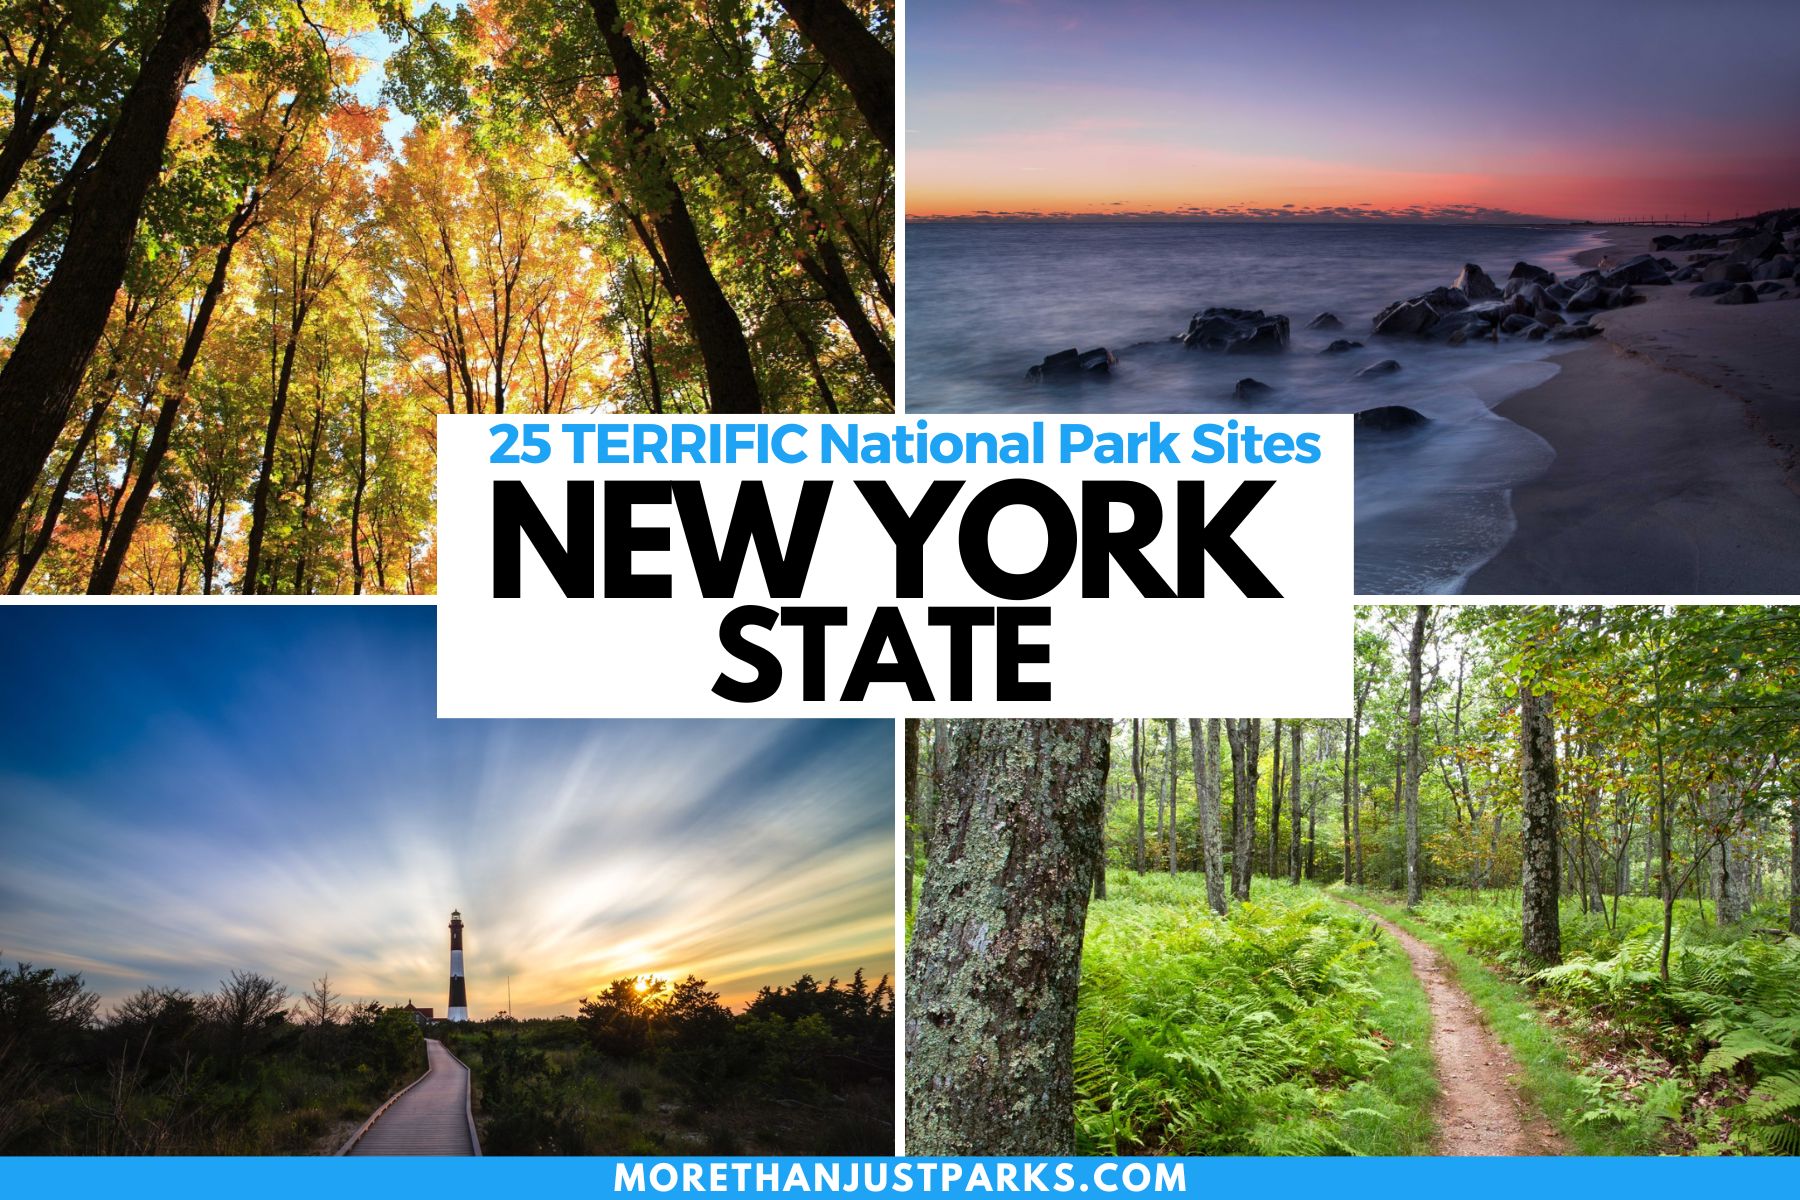 New York State NPS